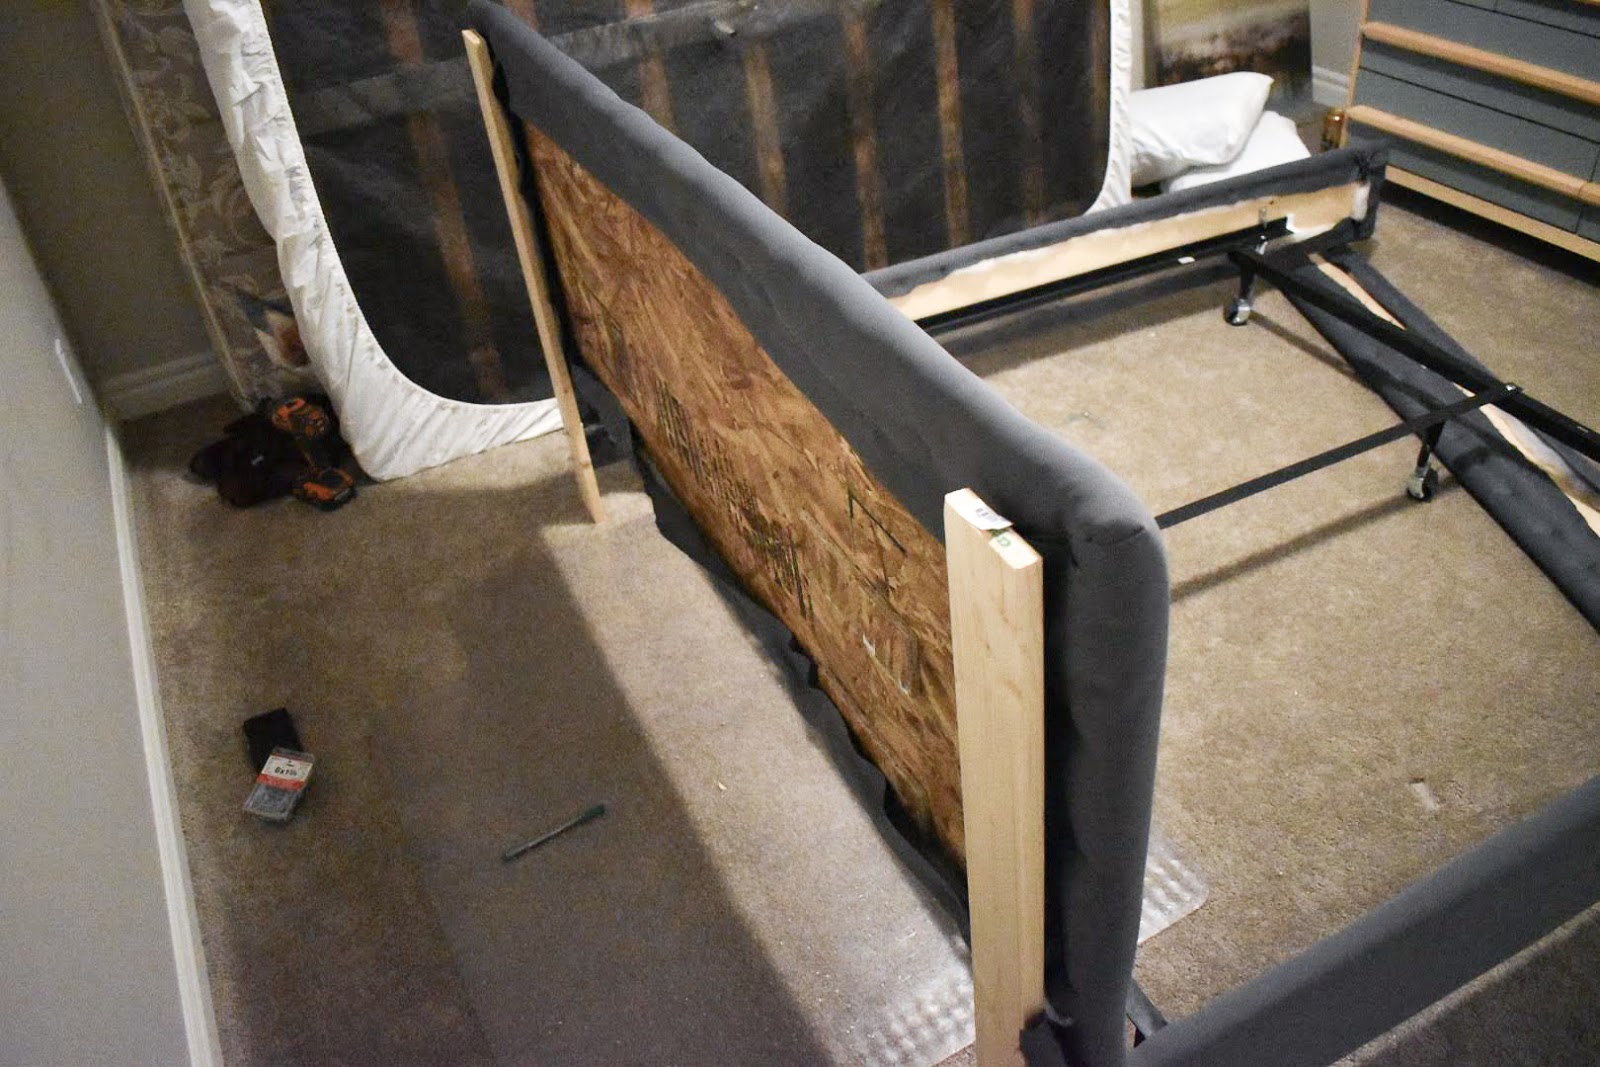 Metal Bed Frame Into An Upholstered, How To Install Headboard Metal Frame